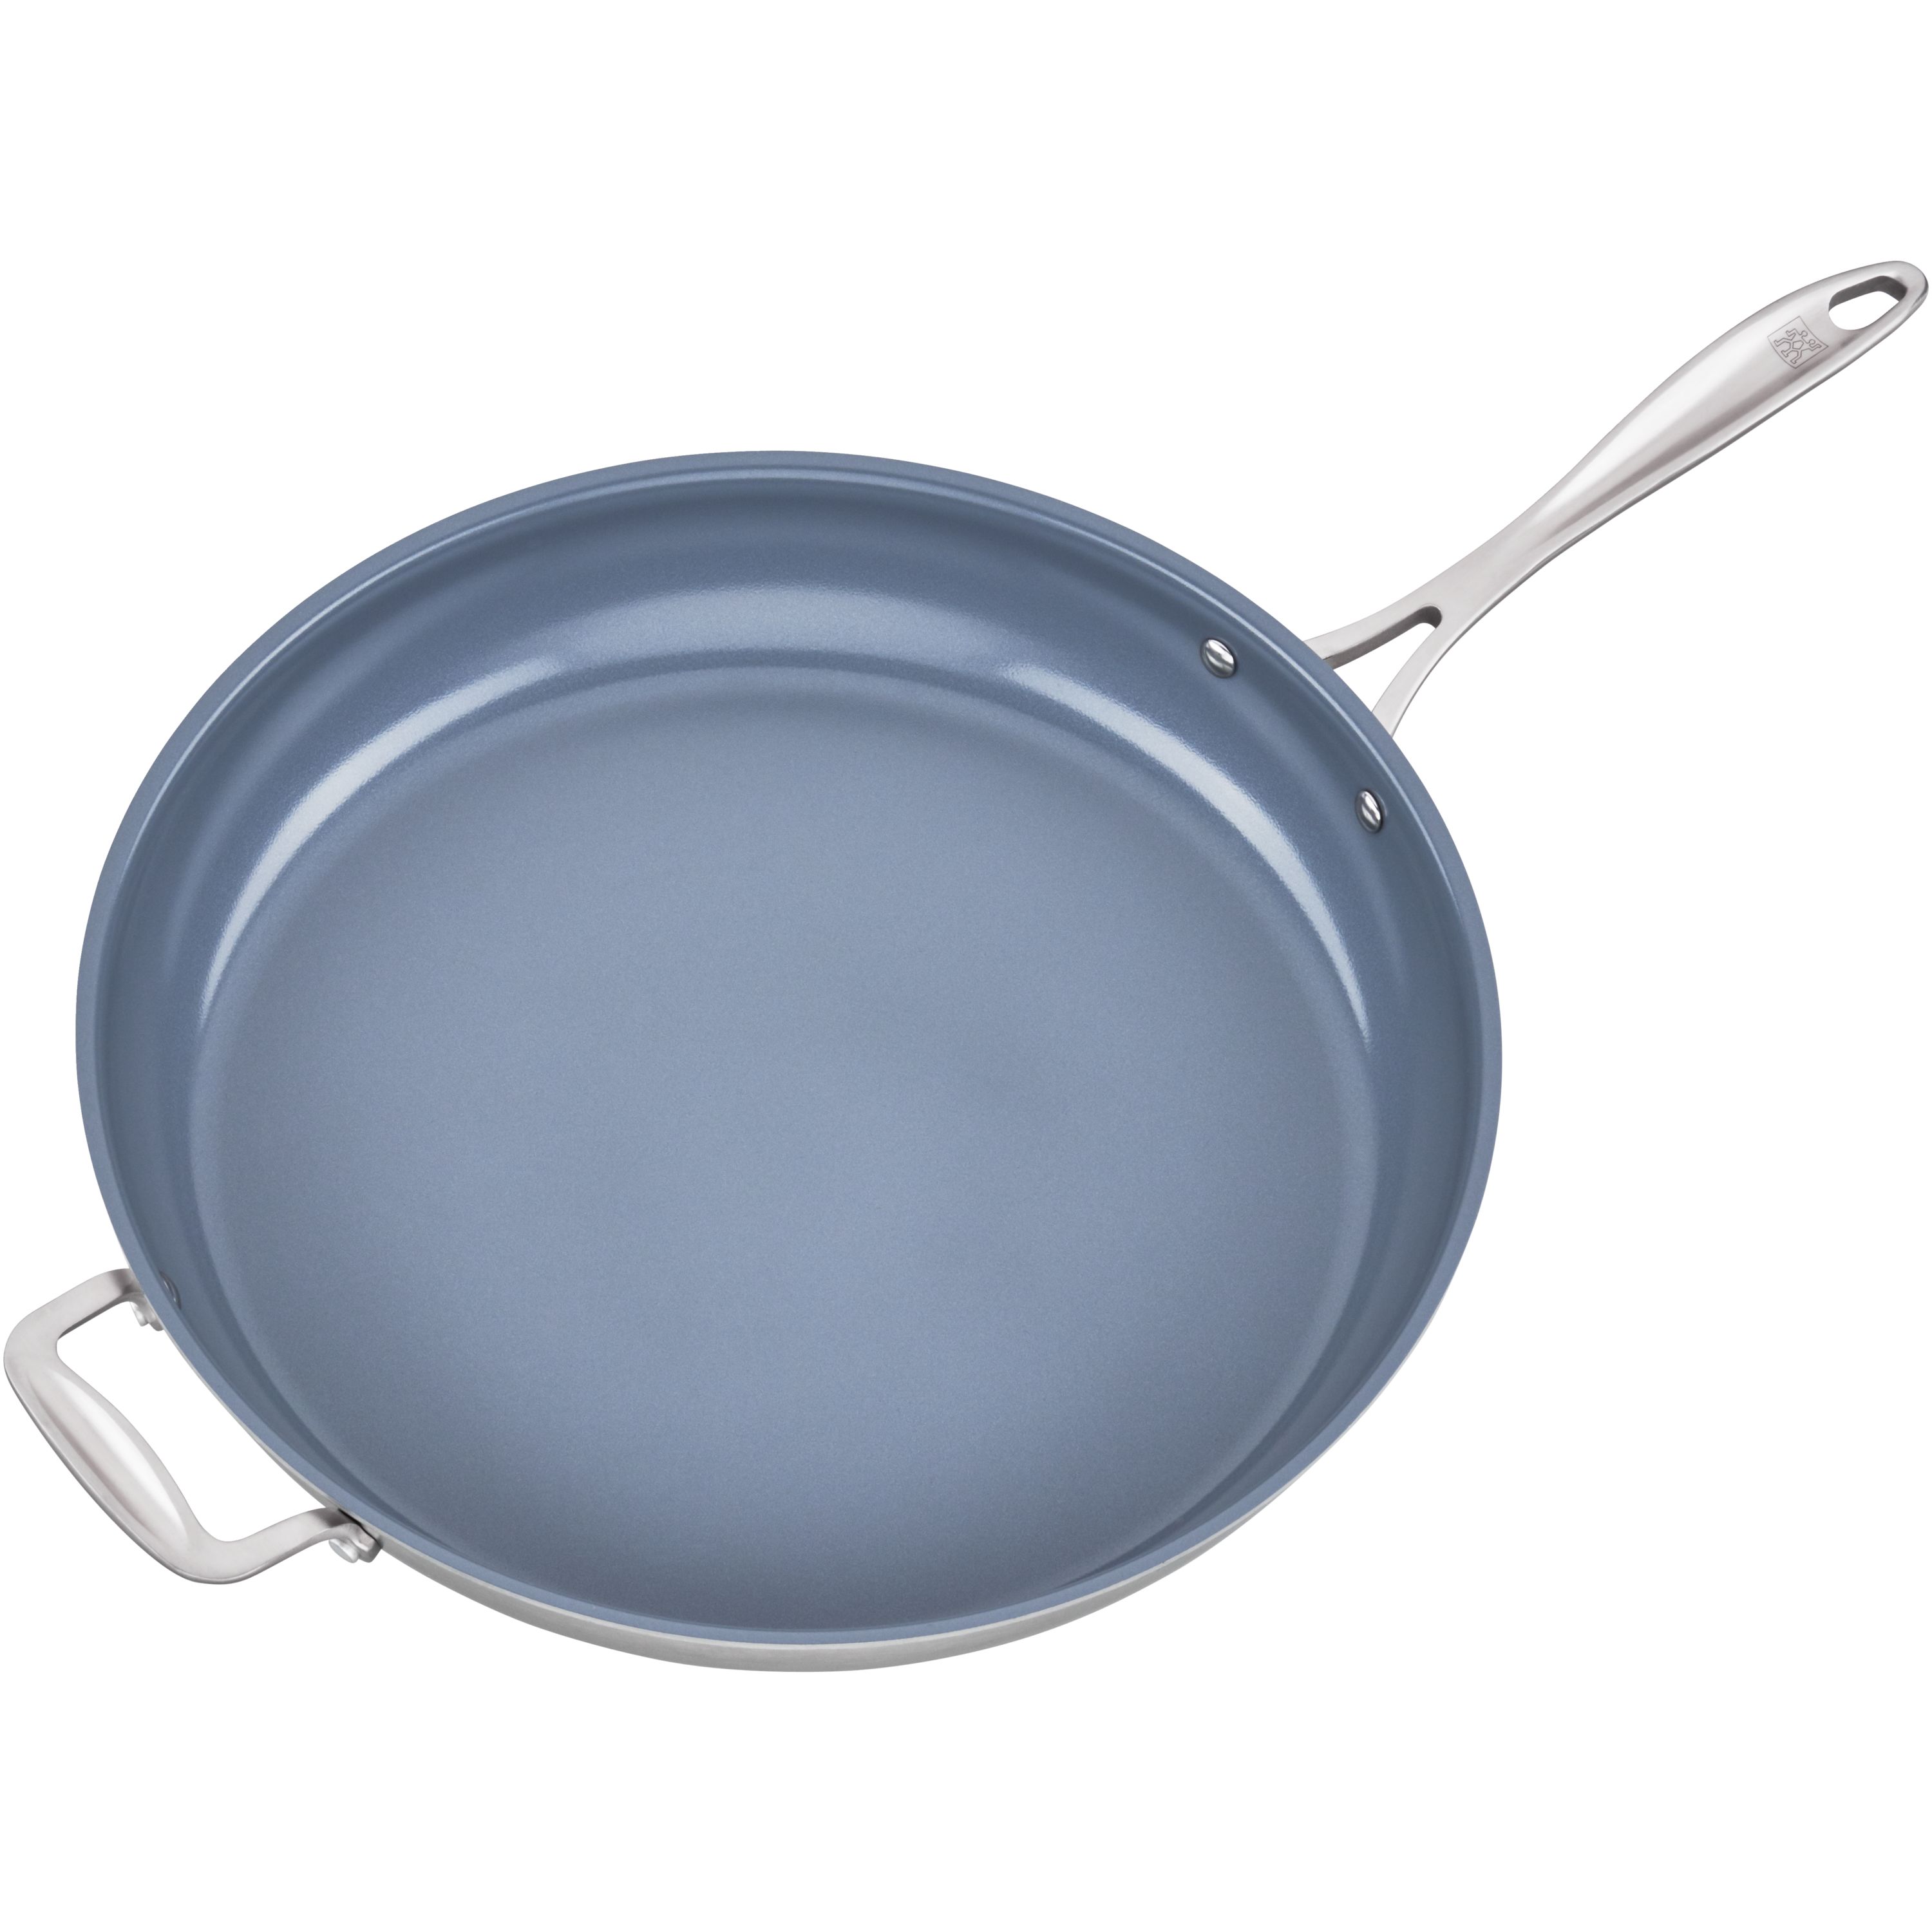 Zwilling Spirit Ceramic Nonstick 14-Inch, 18/10 Stainless Steel, Non-Stick, Frying Pan